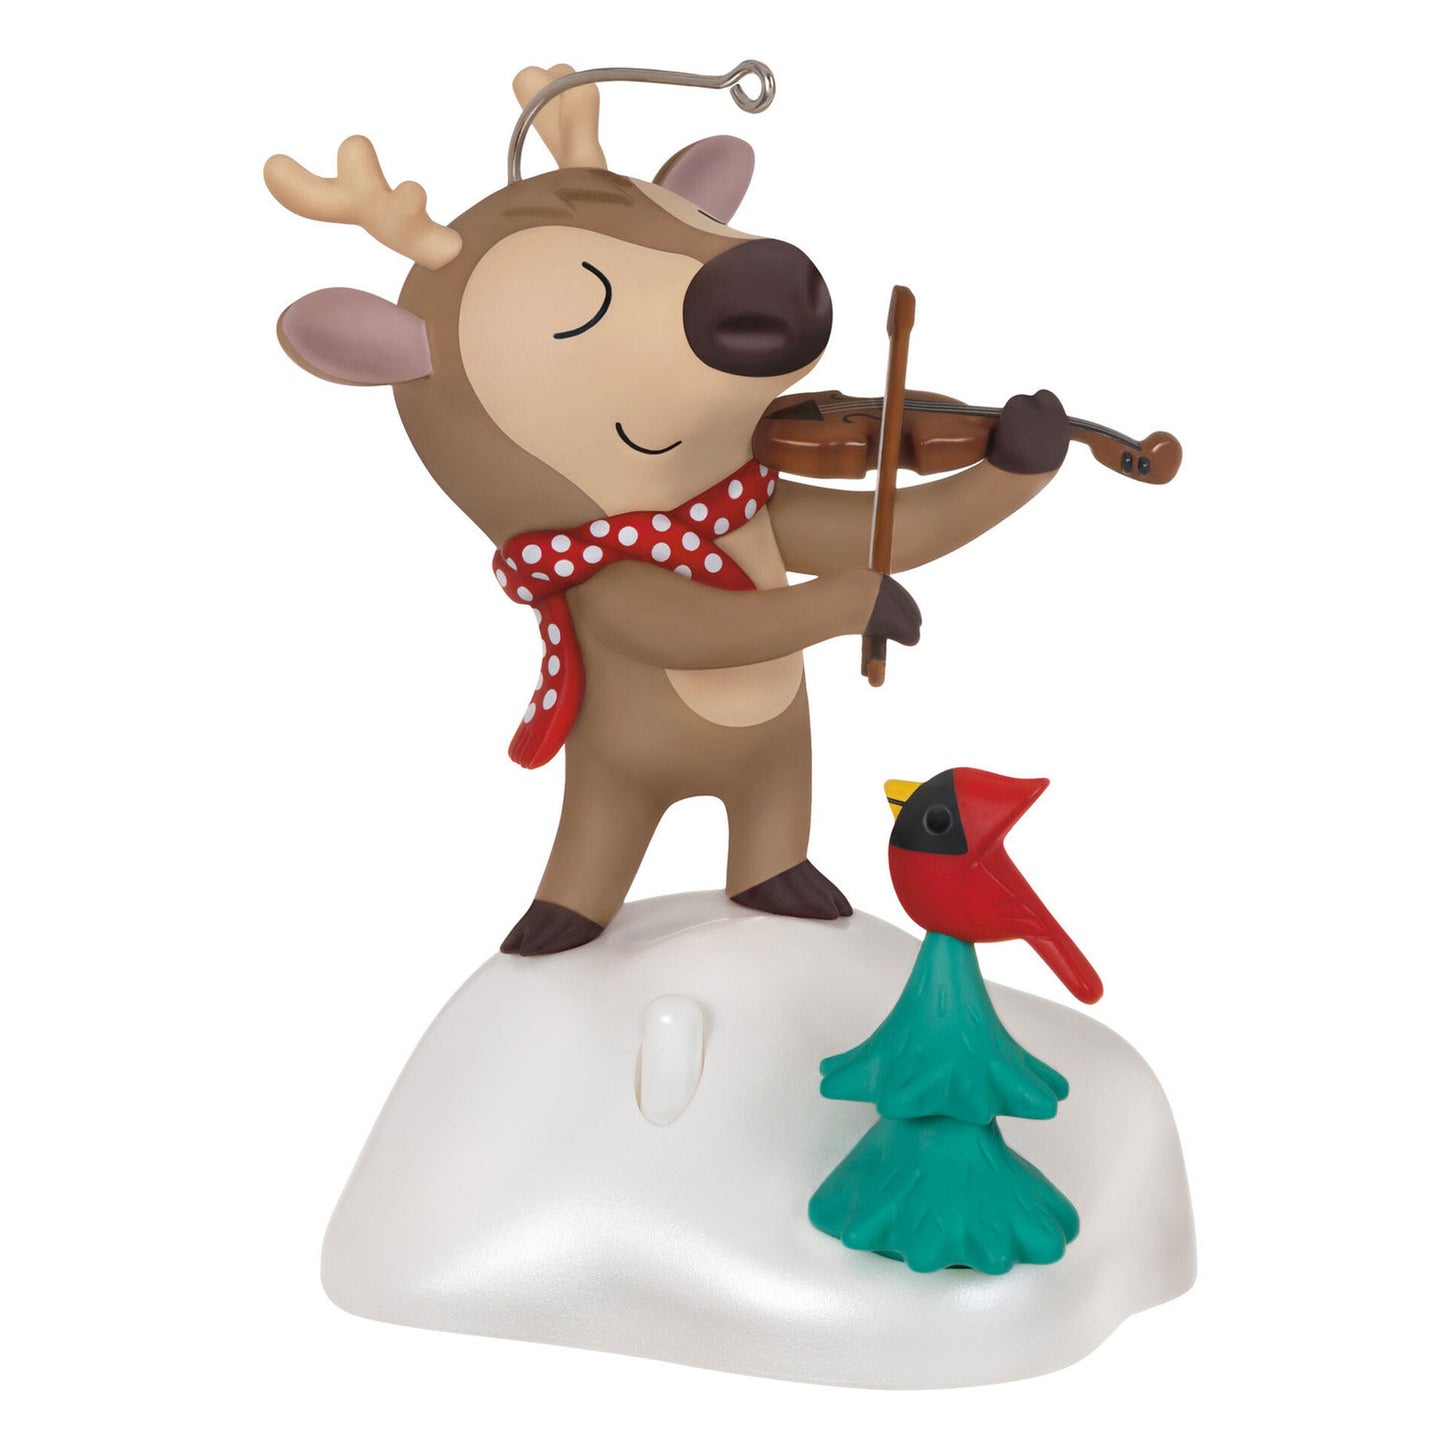 Christmas ornament depicting a reindeer with a red and white polka dotted scarf, standing on a snowy hill playing a violin. There is a small evergreen tree in front of him with a red cardinal perched on top. 